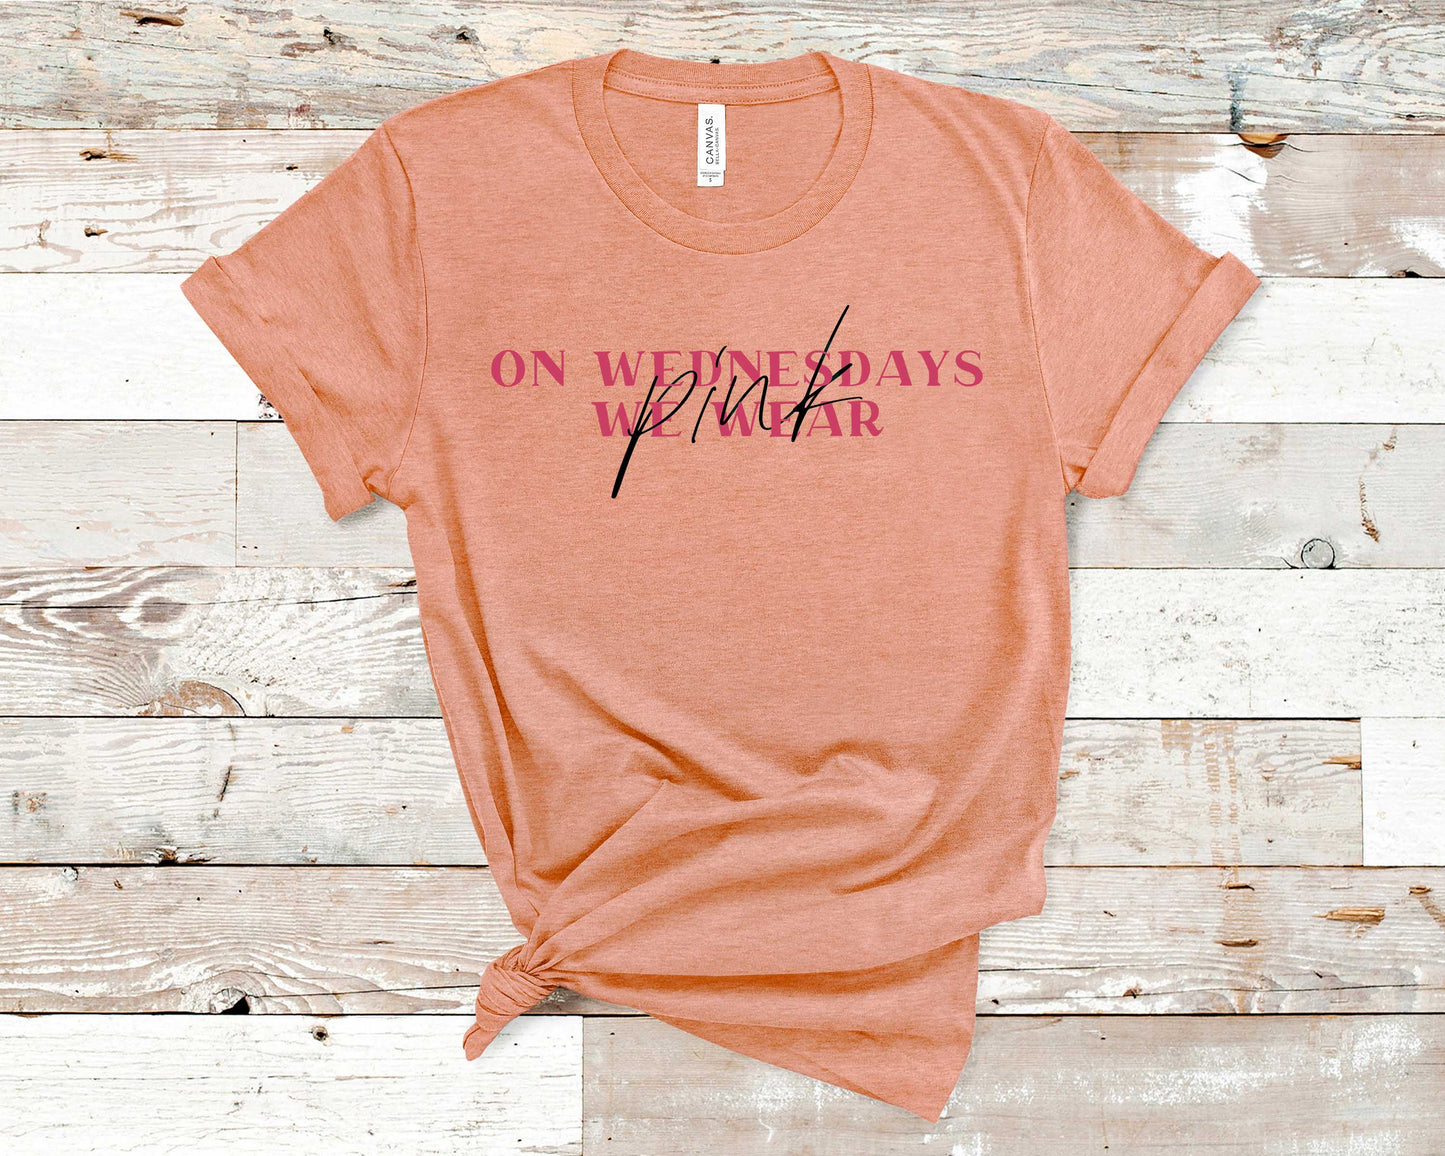 On Wednesdays We Wear Pink - Funny/ Sarcastic